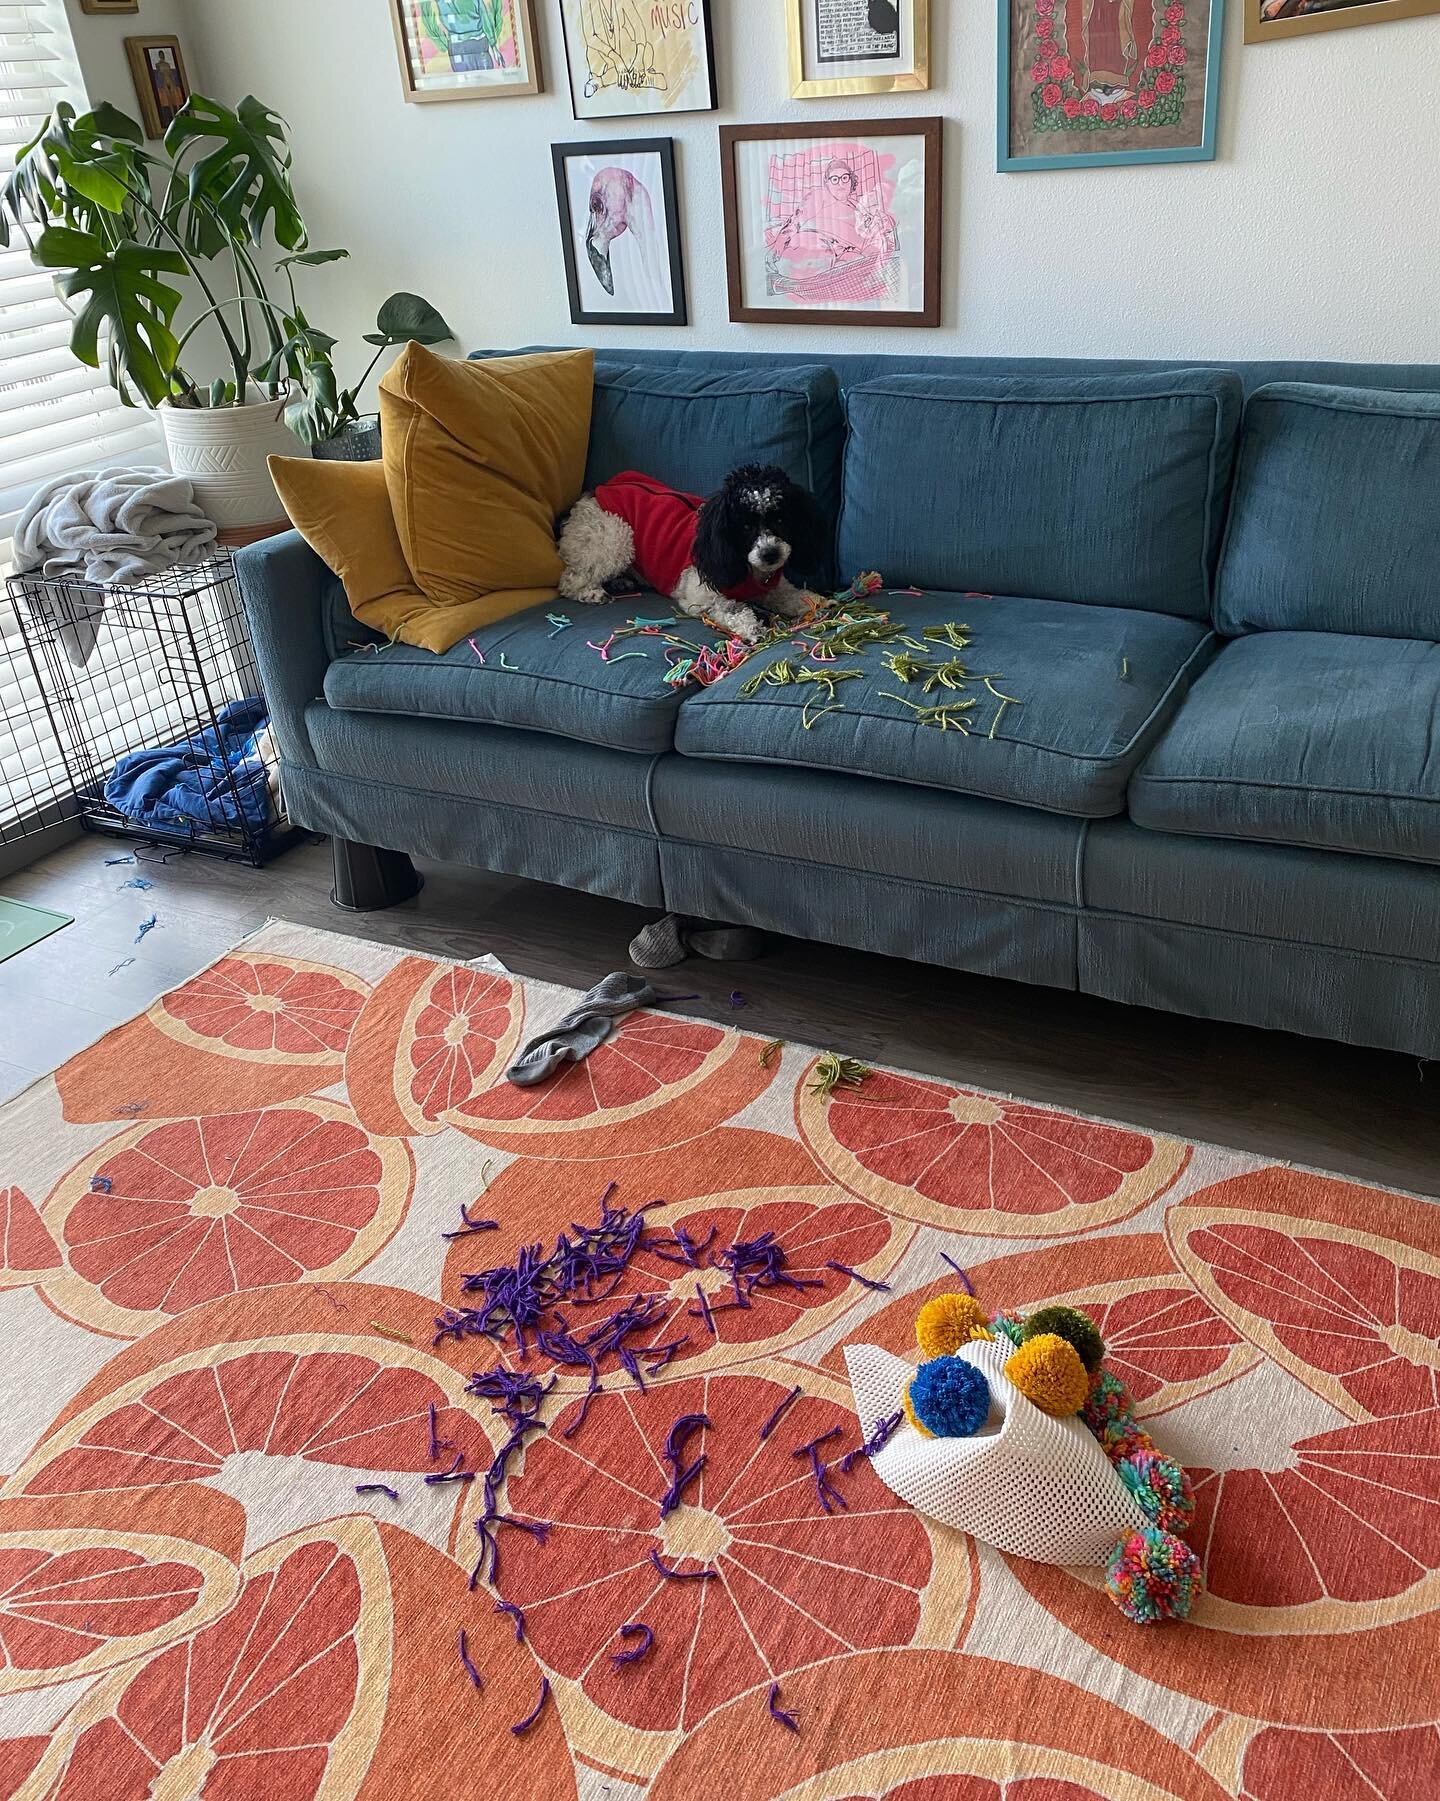 so if you saw my story, i was trying to make a little pom pom rug cuz making pom poms just looked so fun. but alas, i have a tiny demon dog who loves to destroy anything she can (we love her but its true) and this was the result. at least she left so